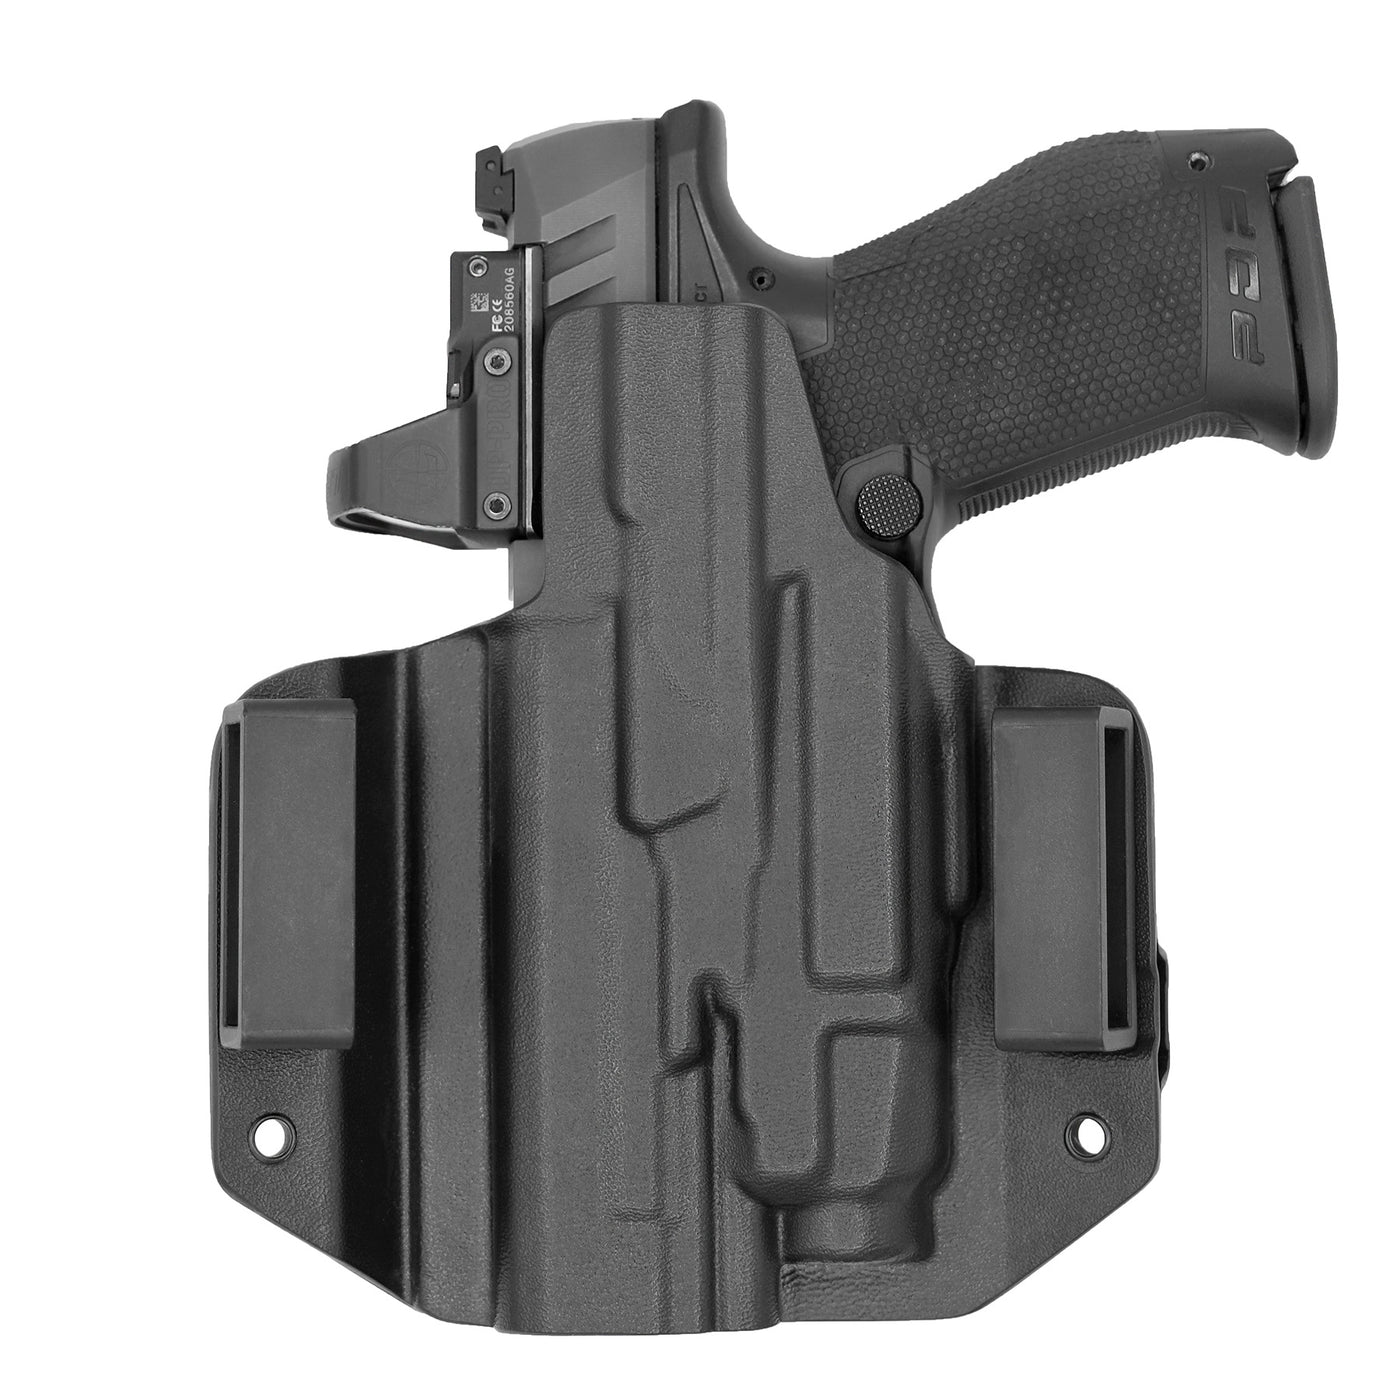 C&G Holsters quickship OWB Tactical H&K P30/sk Streamlight TLR7/a in holstered position back view